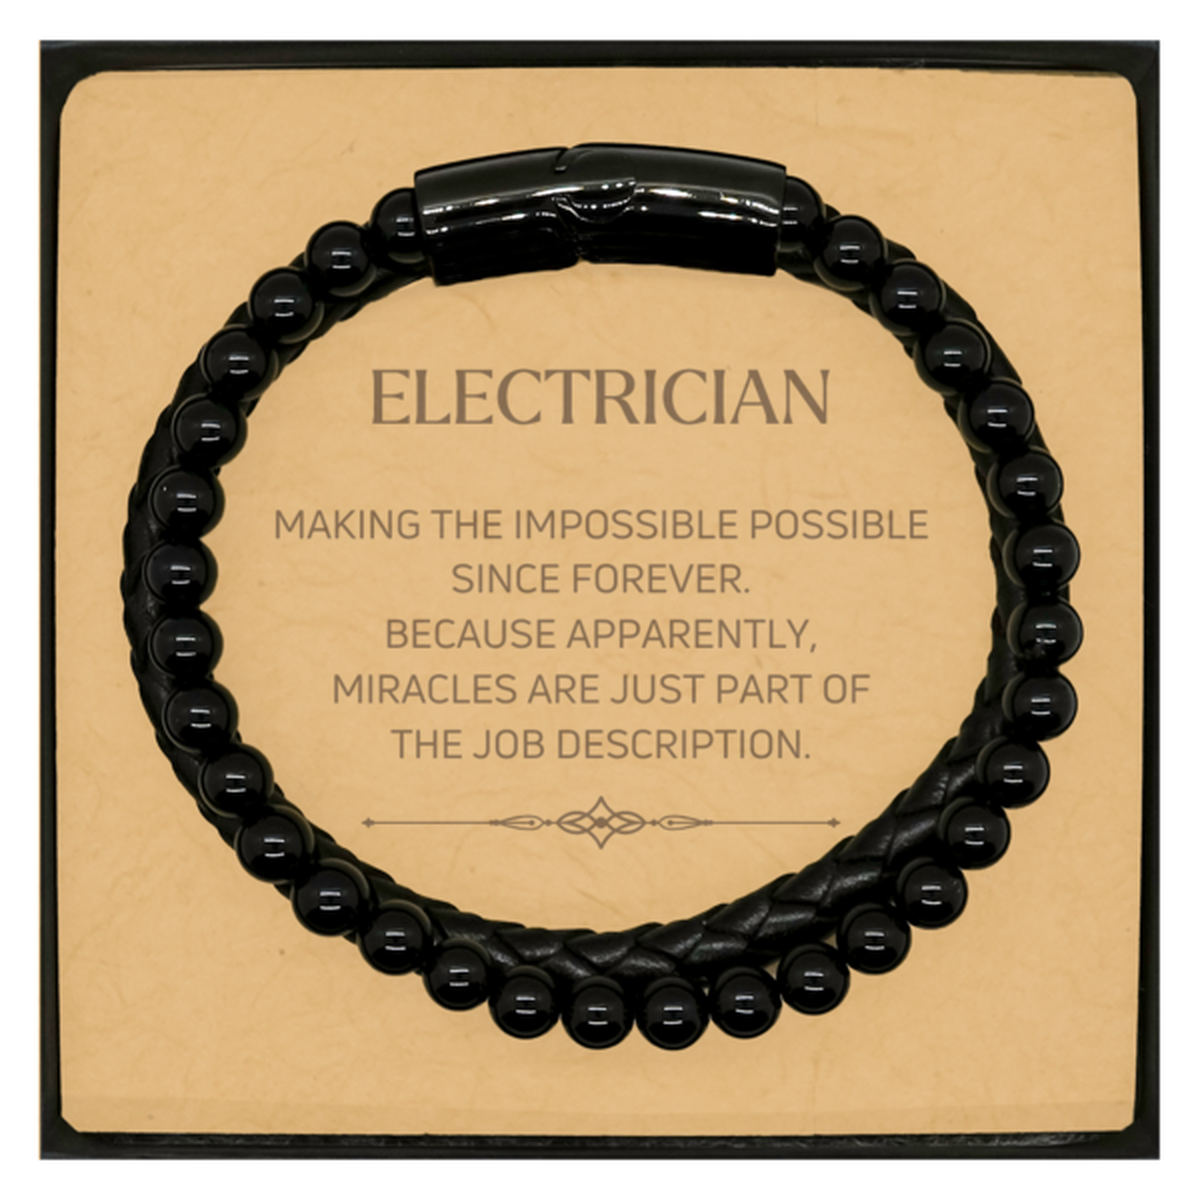 Funny Electrician Gifts, Miracles are just part of the job description, Inspirational Birthday Christmas Stone Leather Bracelets For Electrician, Men, Women, Coworkers, Friends, Boss